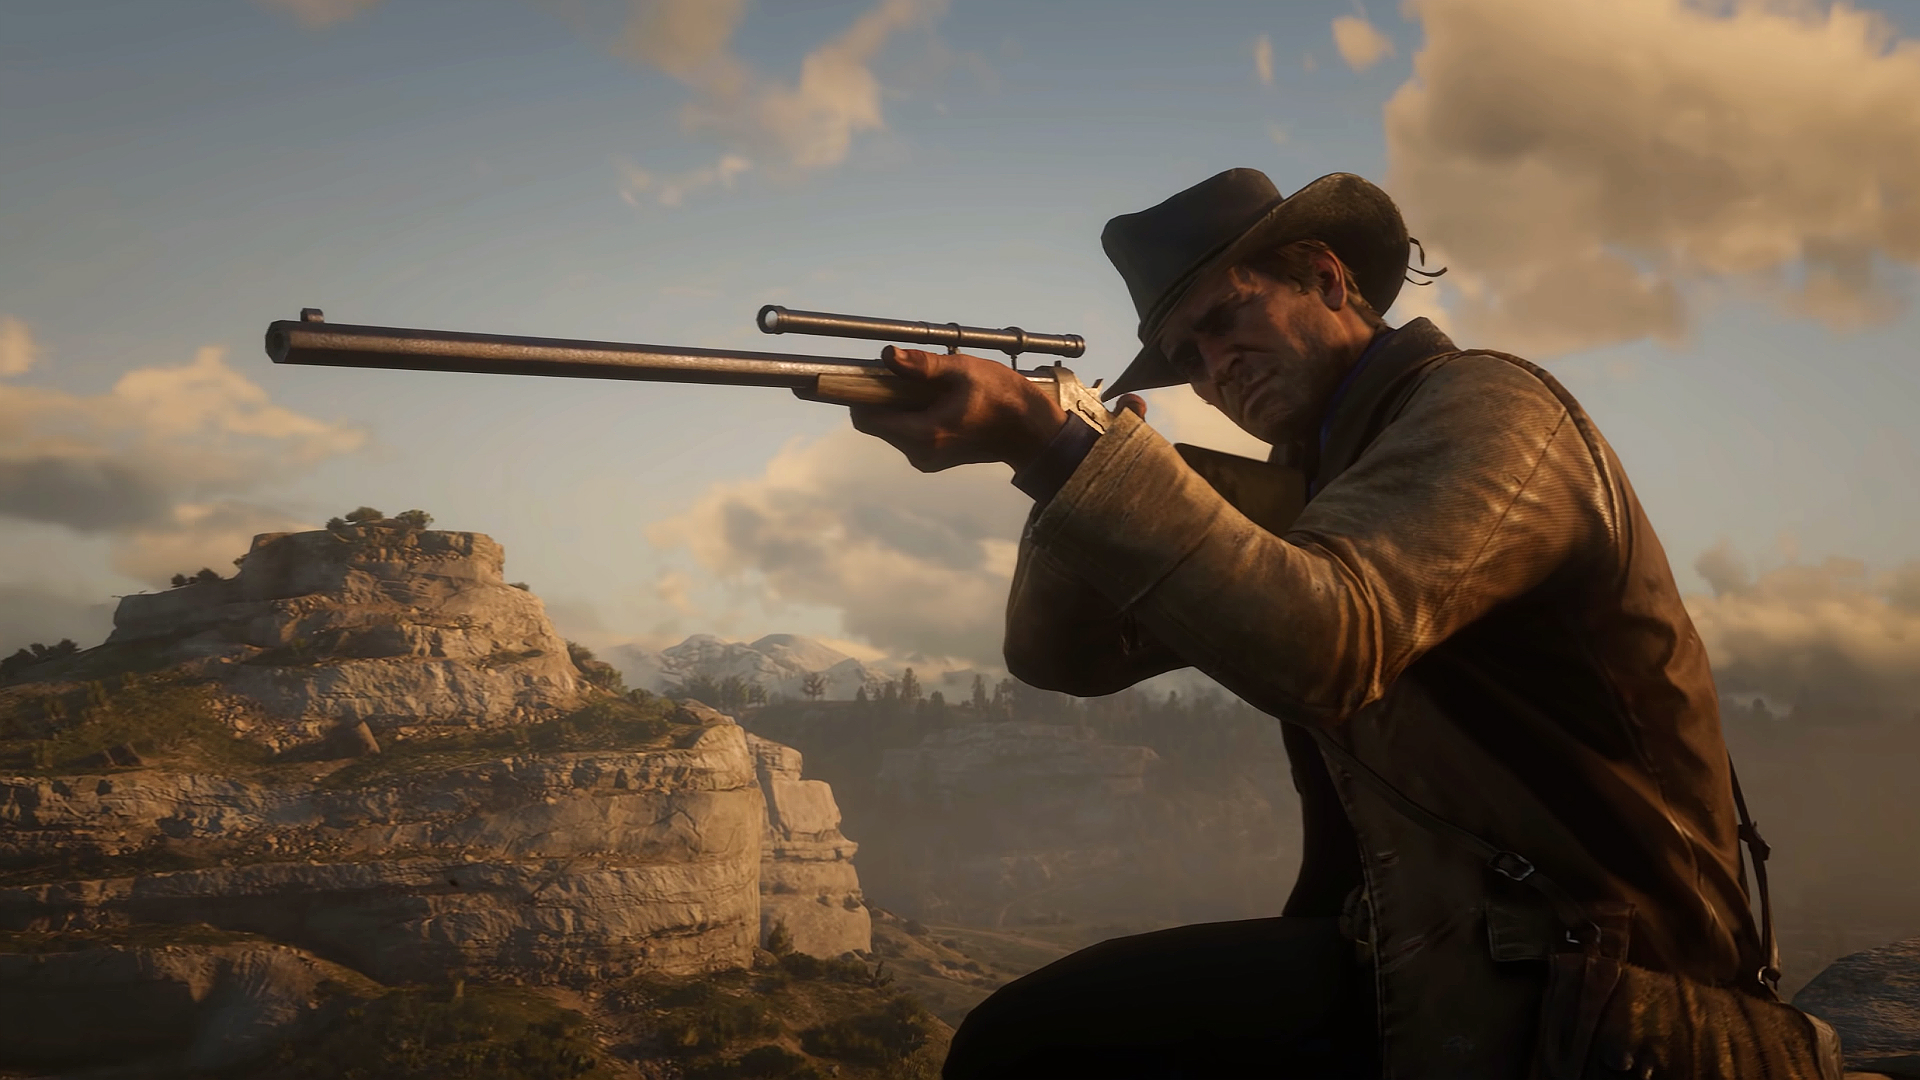 Red Dead Redemption 2 sold-in over 26 million |